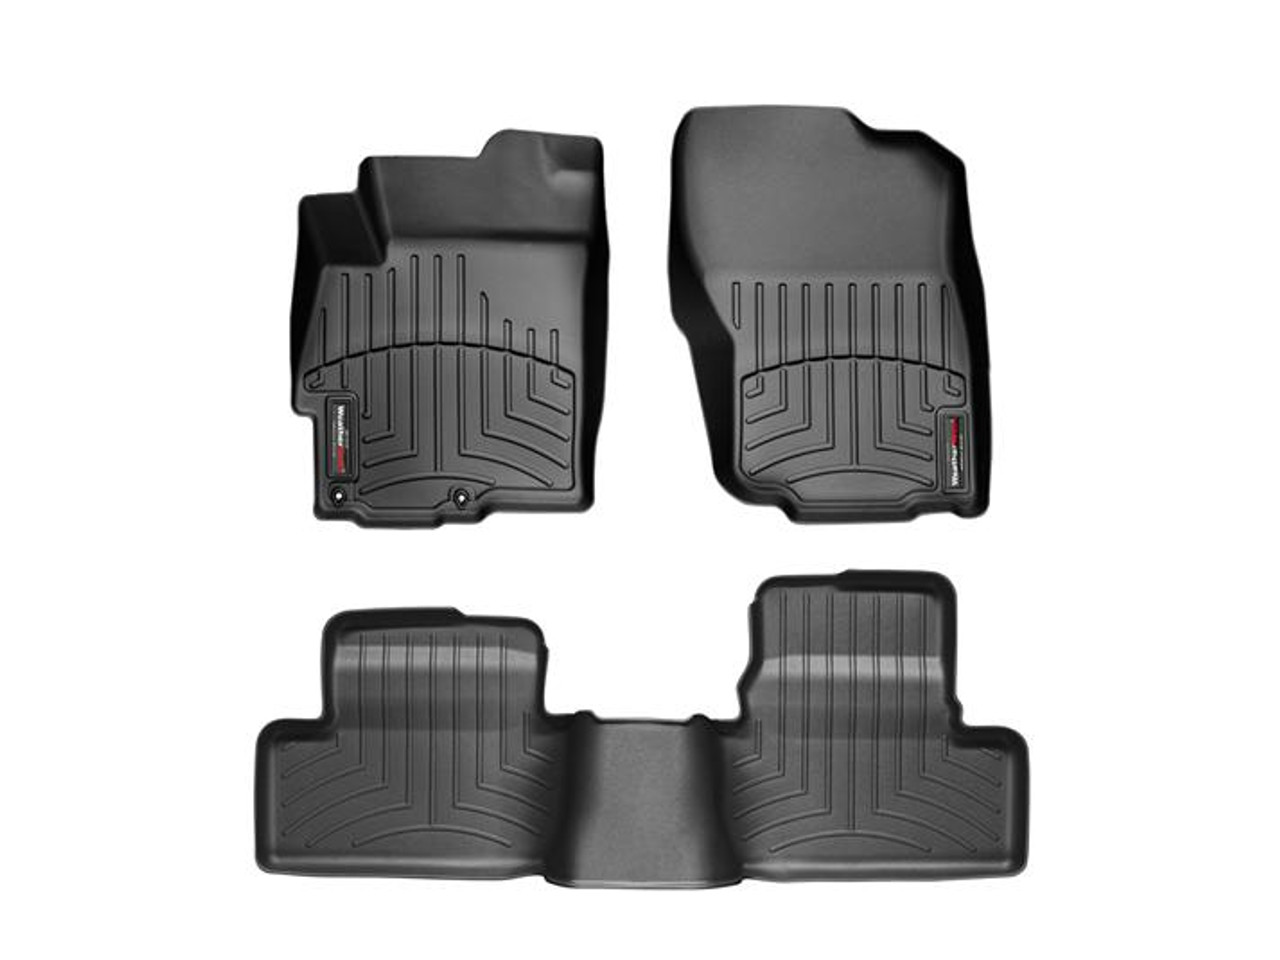 WeatherTech FloorLiners Vs Floor Mats: The Right Choice for Your Vehicle 